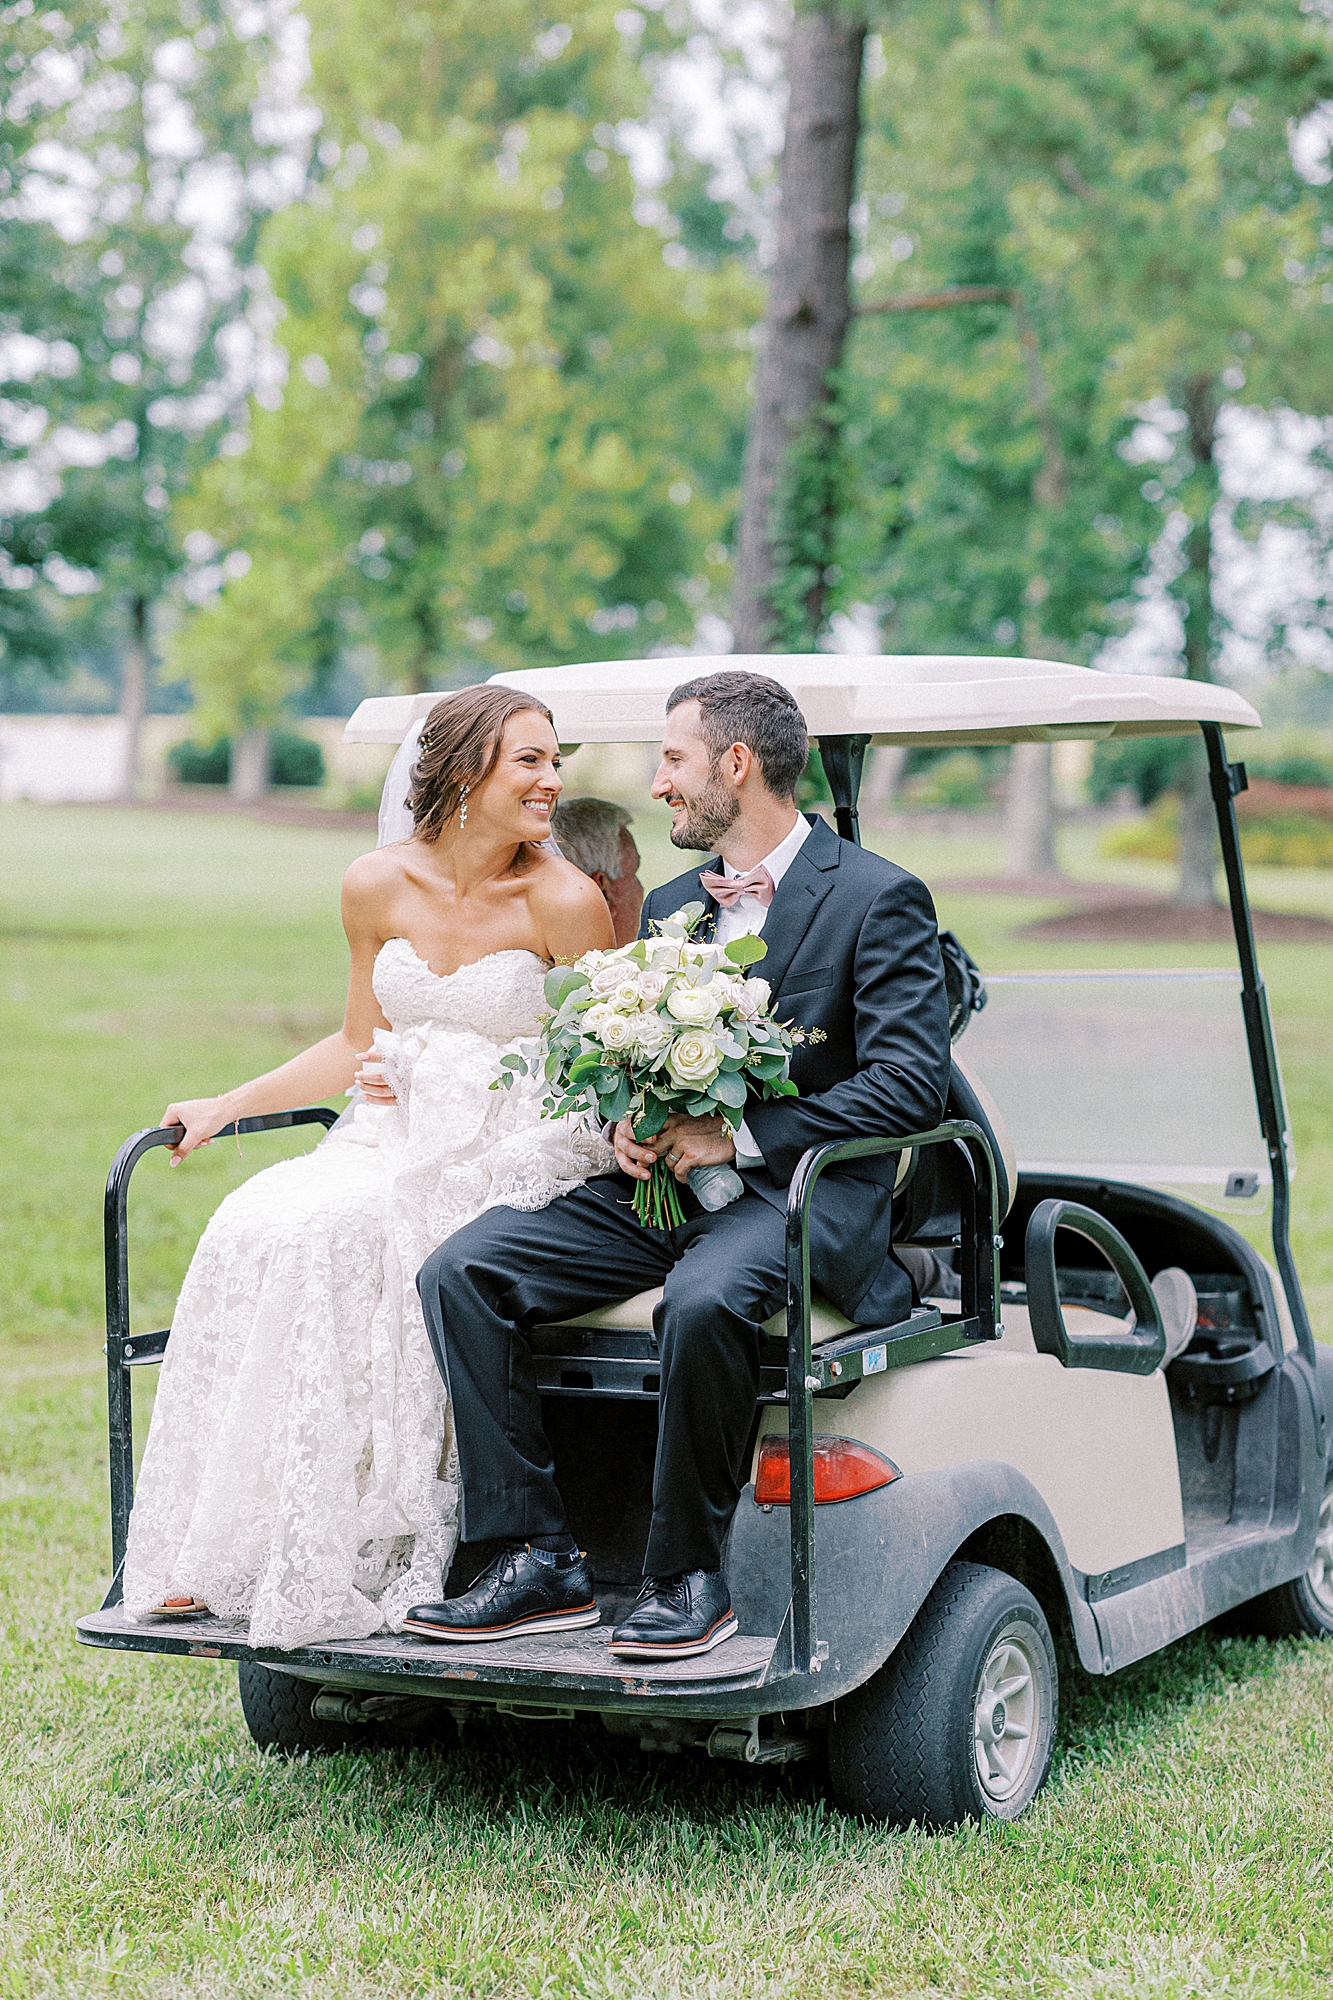 Bride and groom on golf cart heading towards their cocktail hour!